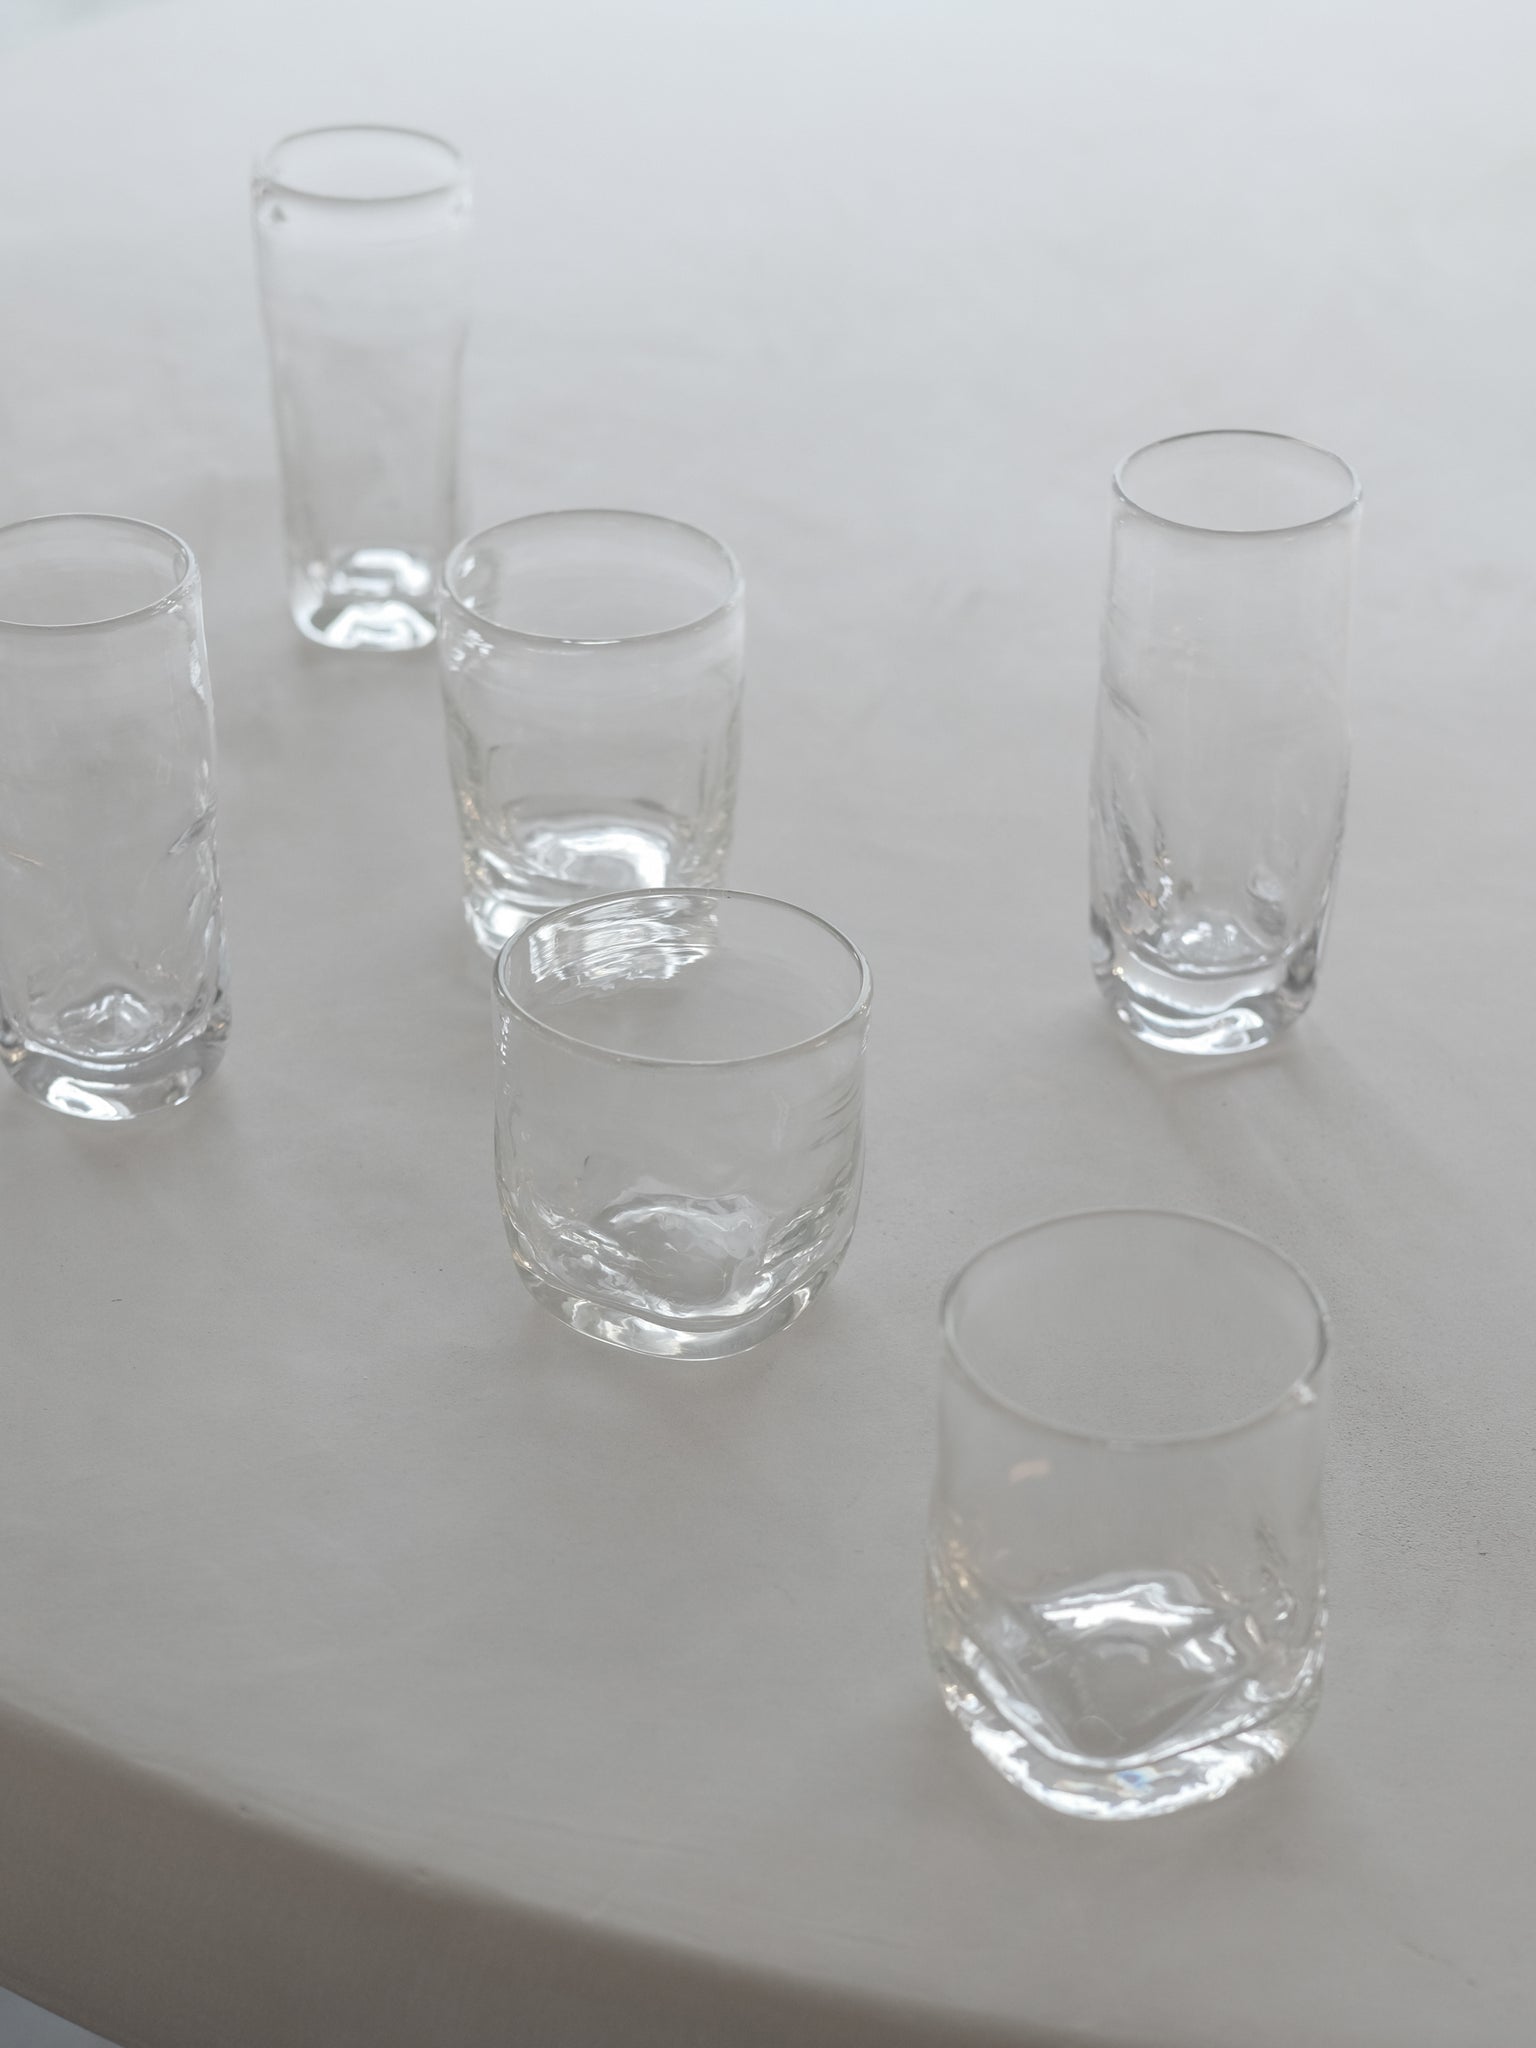 Mouth Blown Glasses